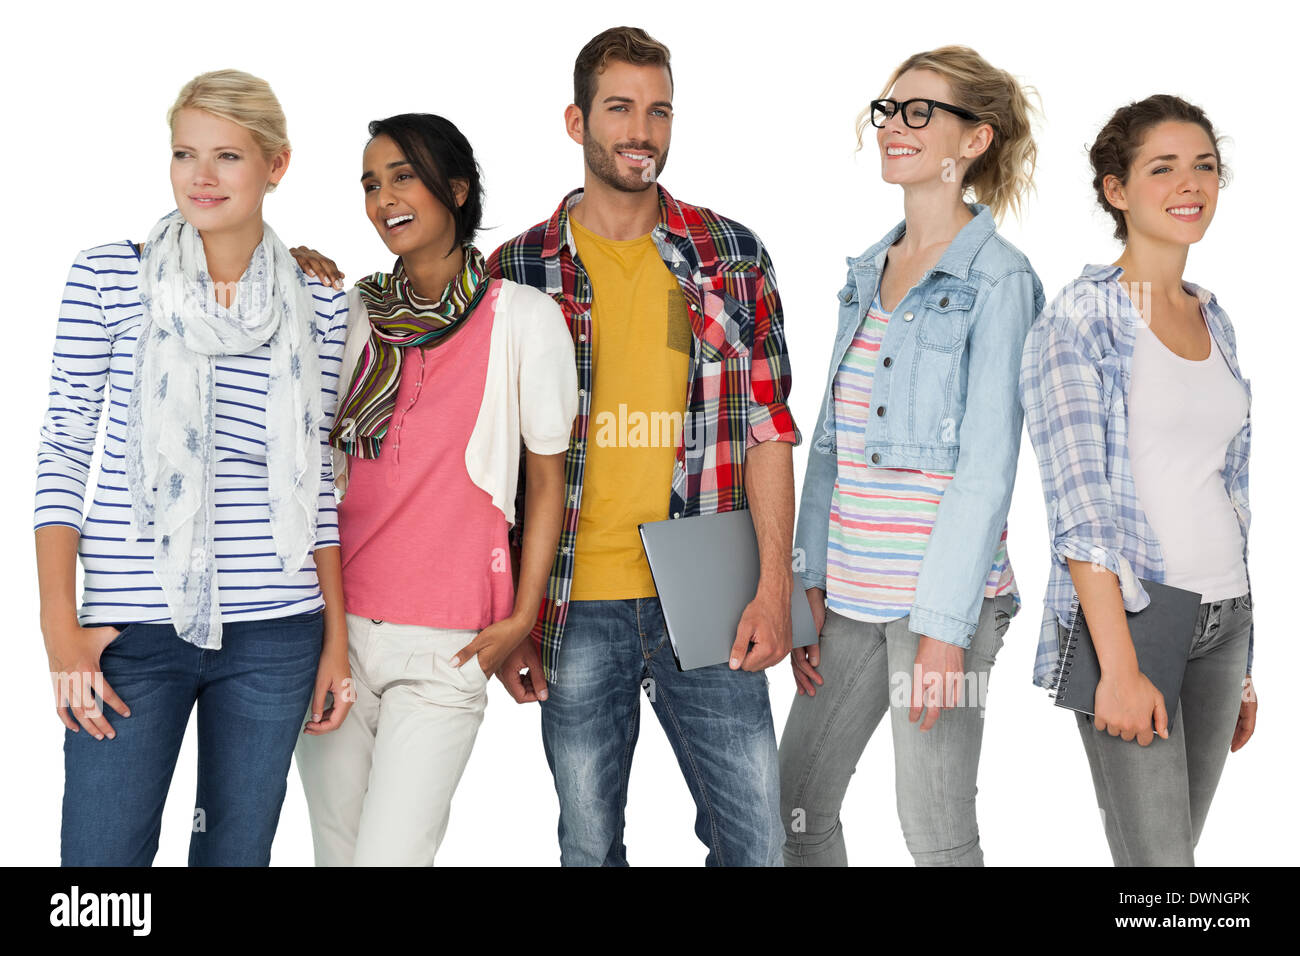 Portrait of casually dressed young people Stock Photo